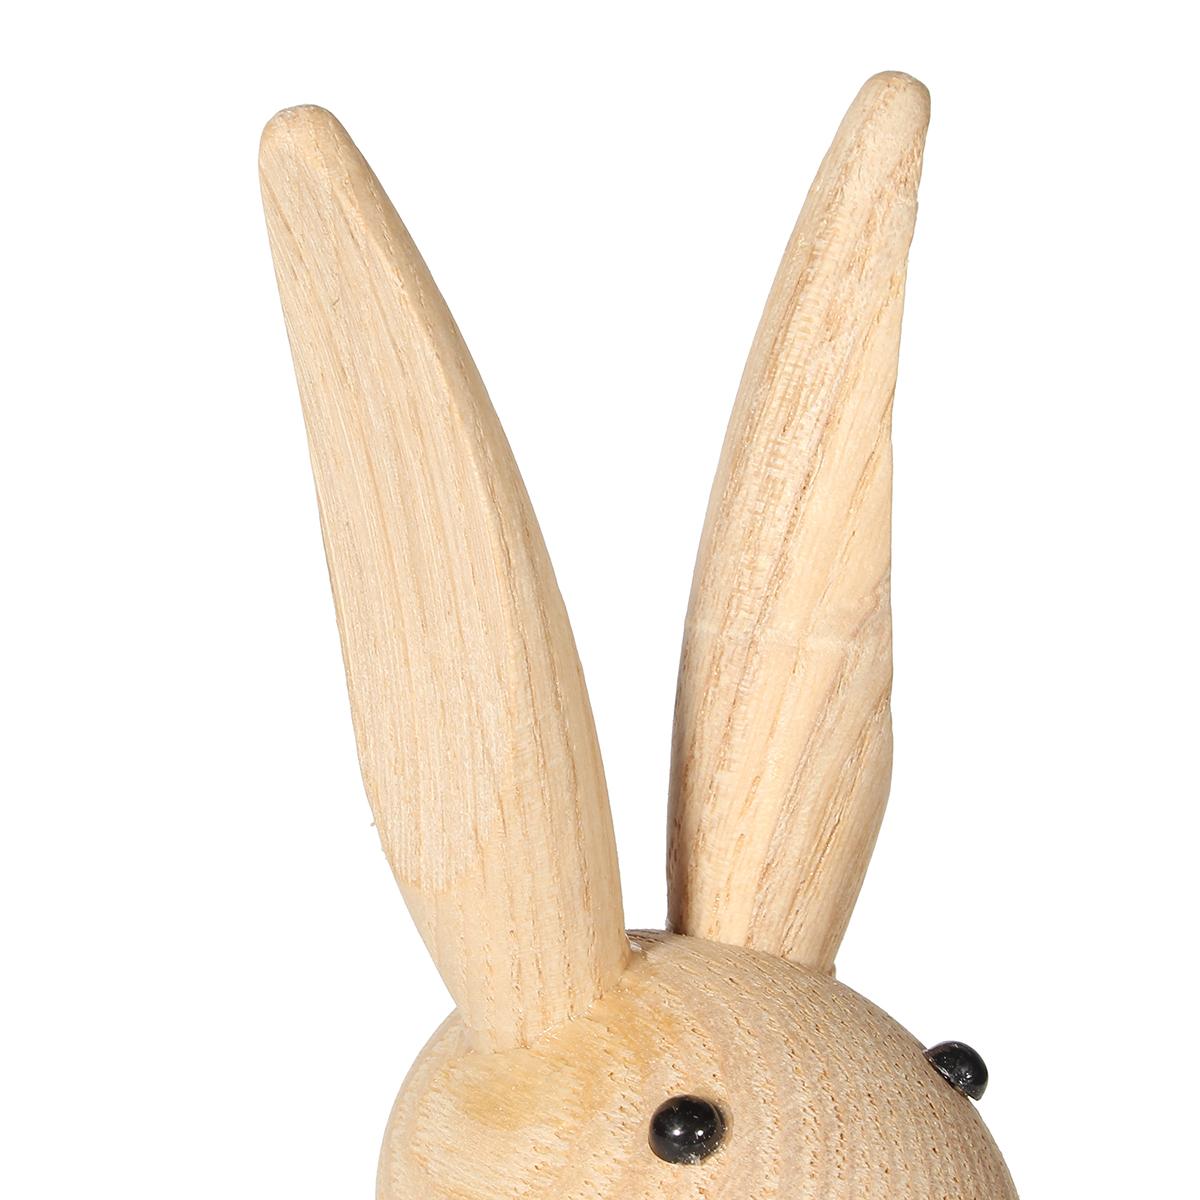 Wooden Carving Miss Rabbit